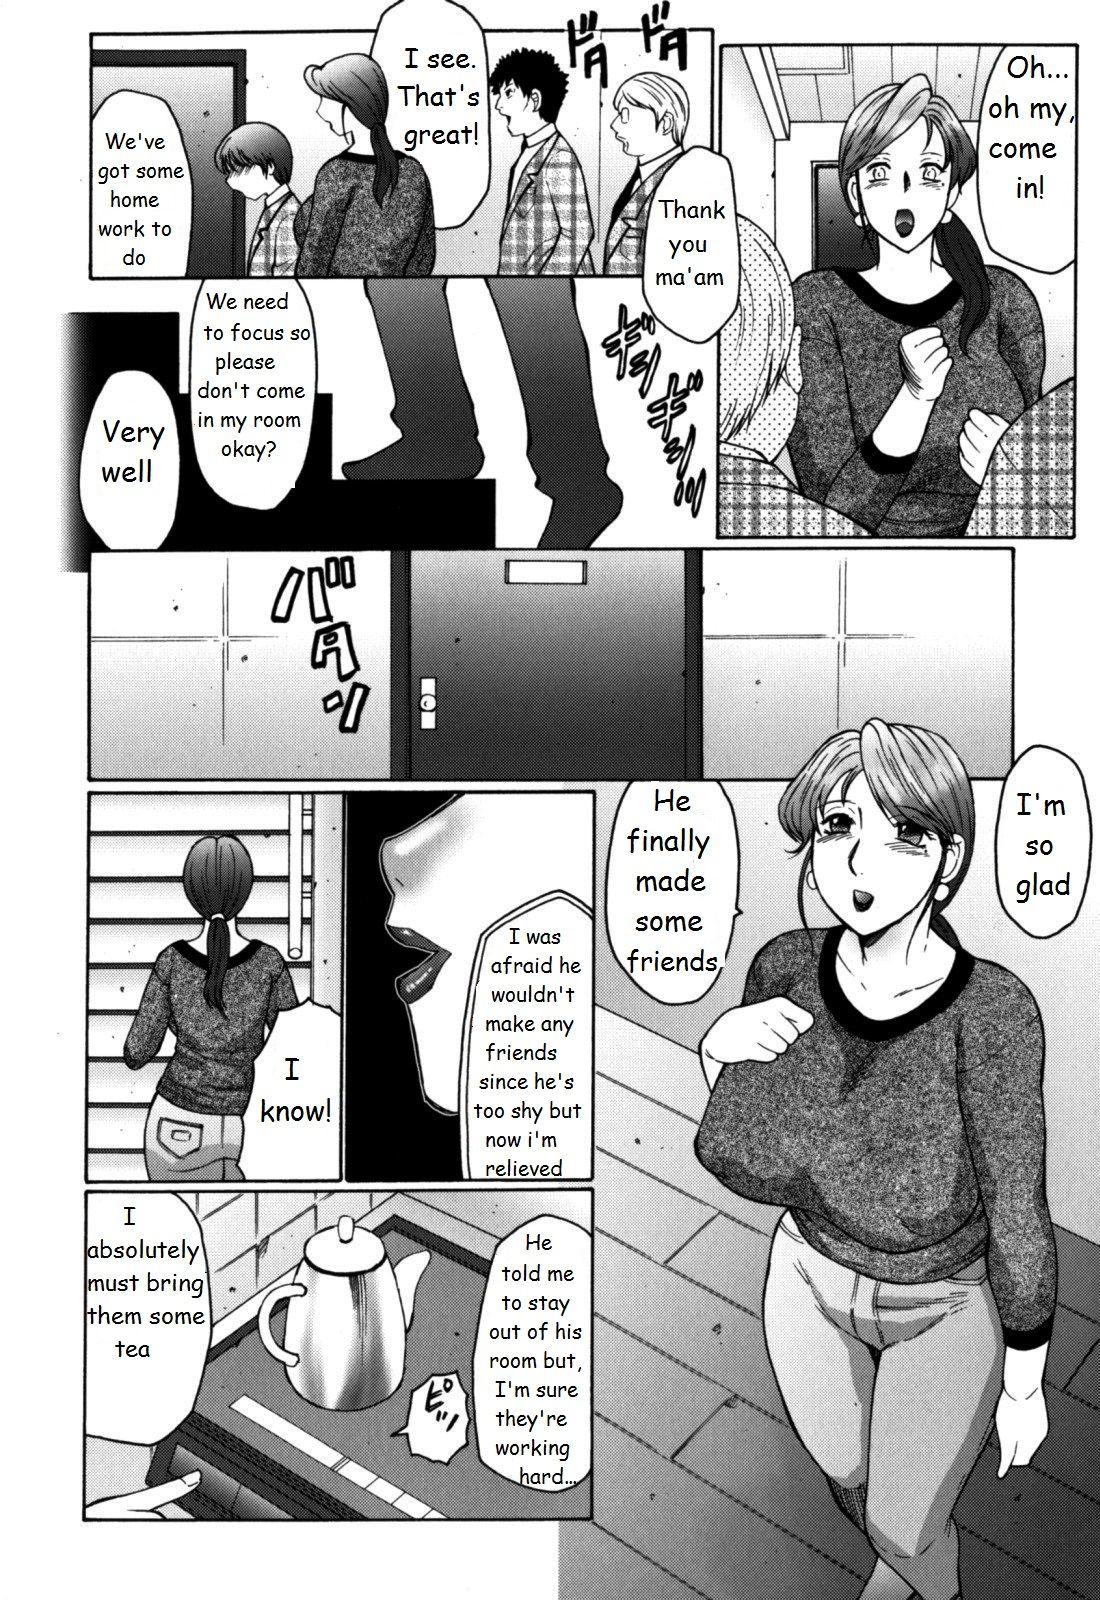 Shaved FUUSEN CLUB HAHA MAMIRE CH. 1-5 ENGLISH.zip T Girl - Page 5